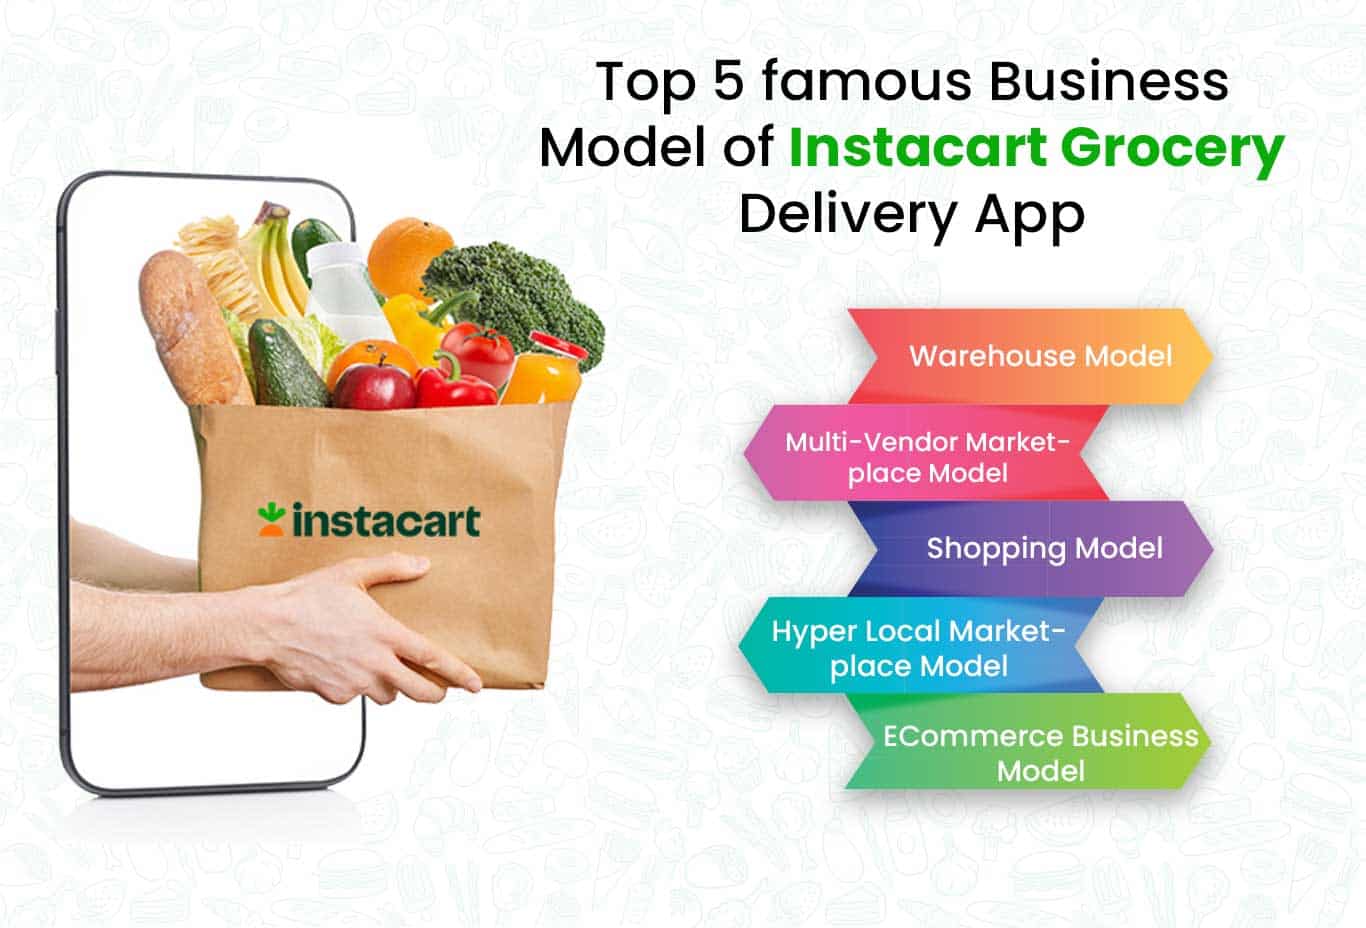 Top 5 famous Business Model of Instacart Grocery Delivery App